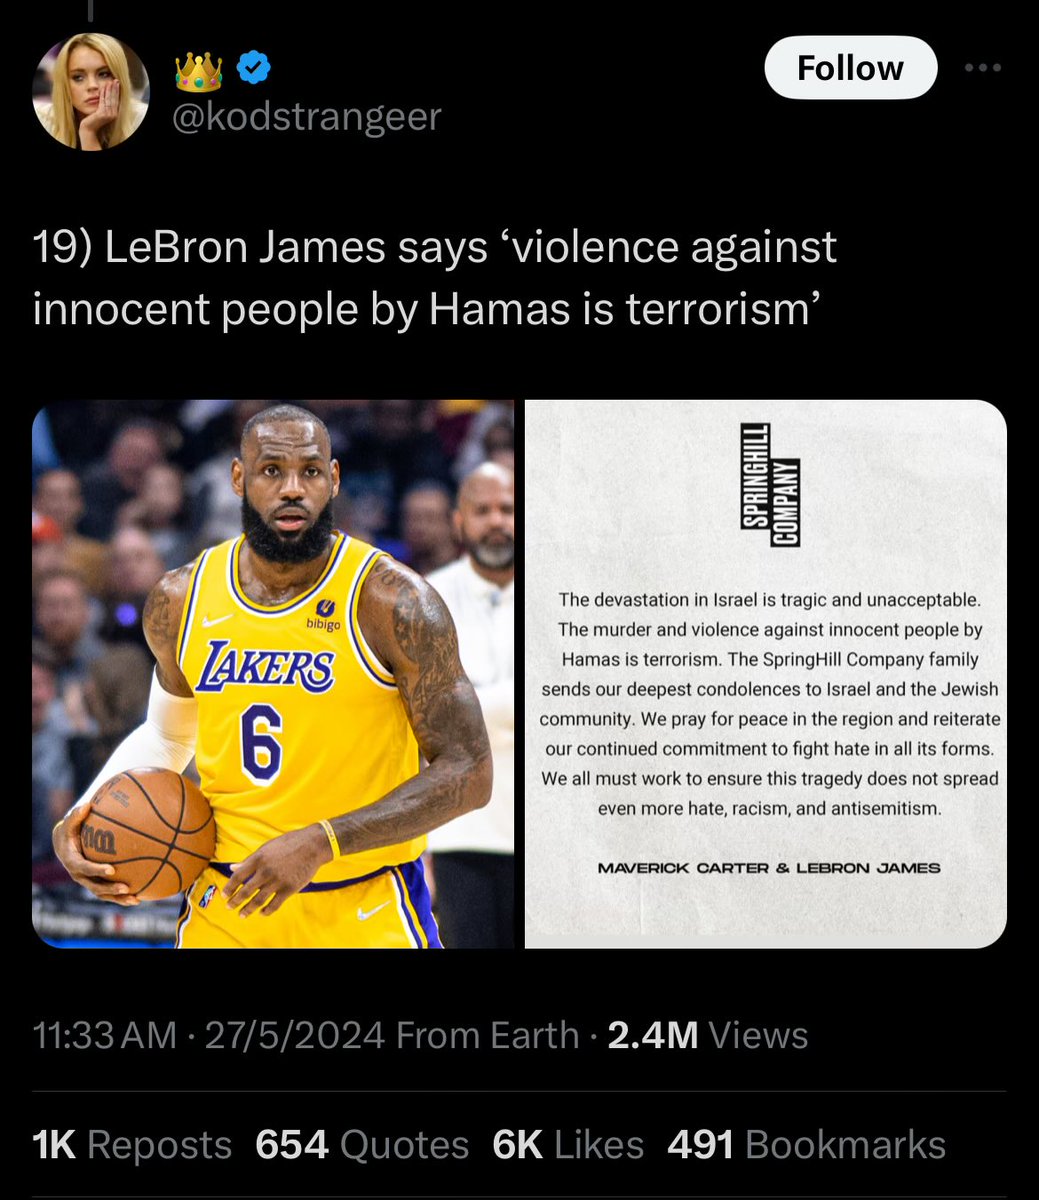 Sorry Lebron, you’re a great basketball player but I’m gonna have to unfollow you for this “violence against innocent people is bad” take that nobody asked for. Read the room, Lebron! Do better!